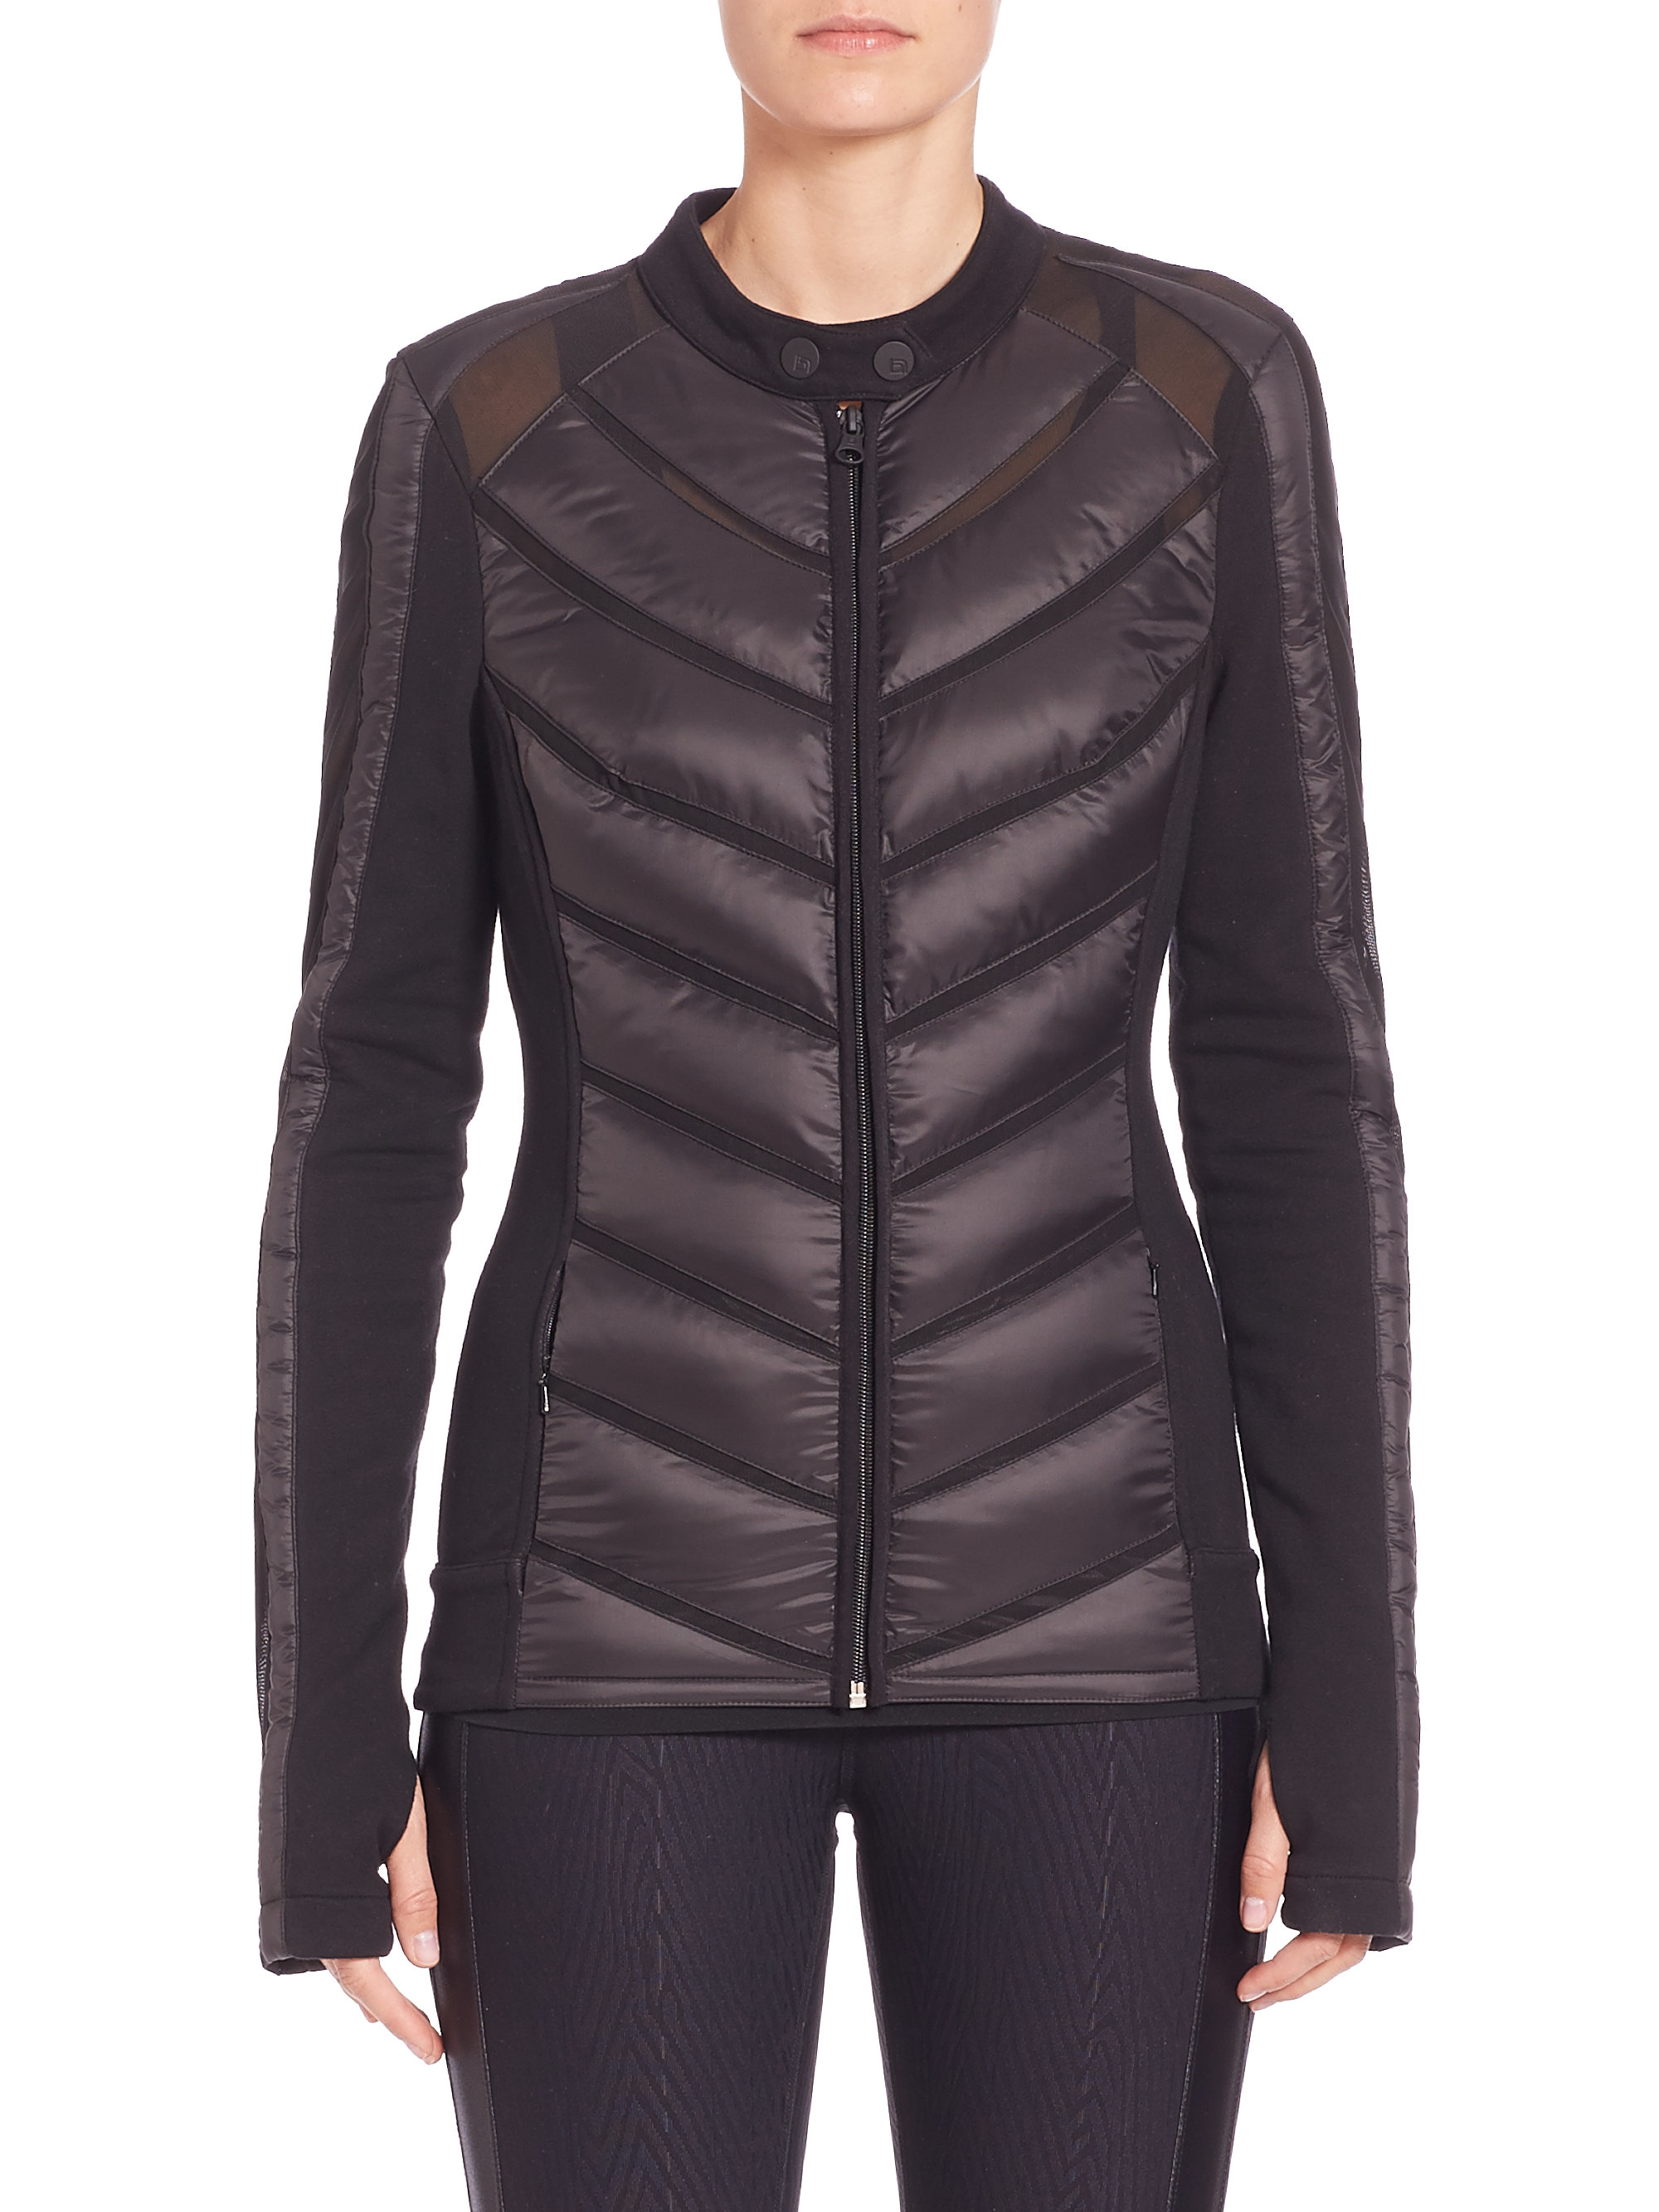 Lyst - Blanc And Noir Packable Moto Jacket in Black2000 x 2667